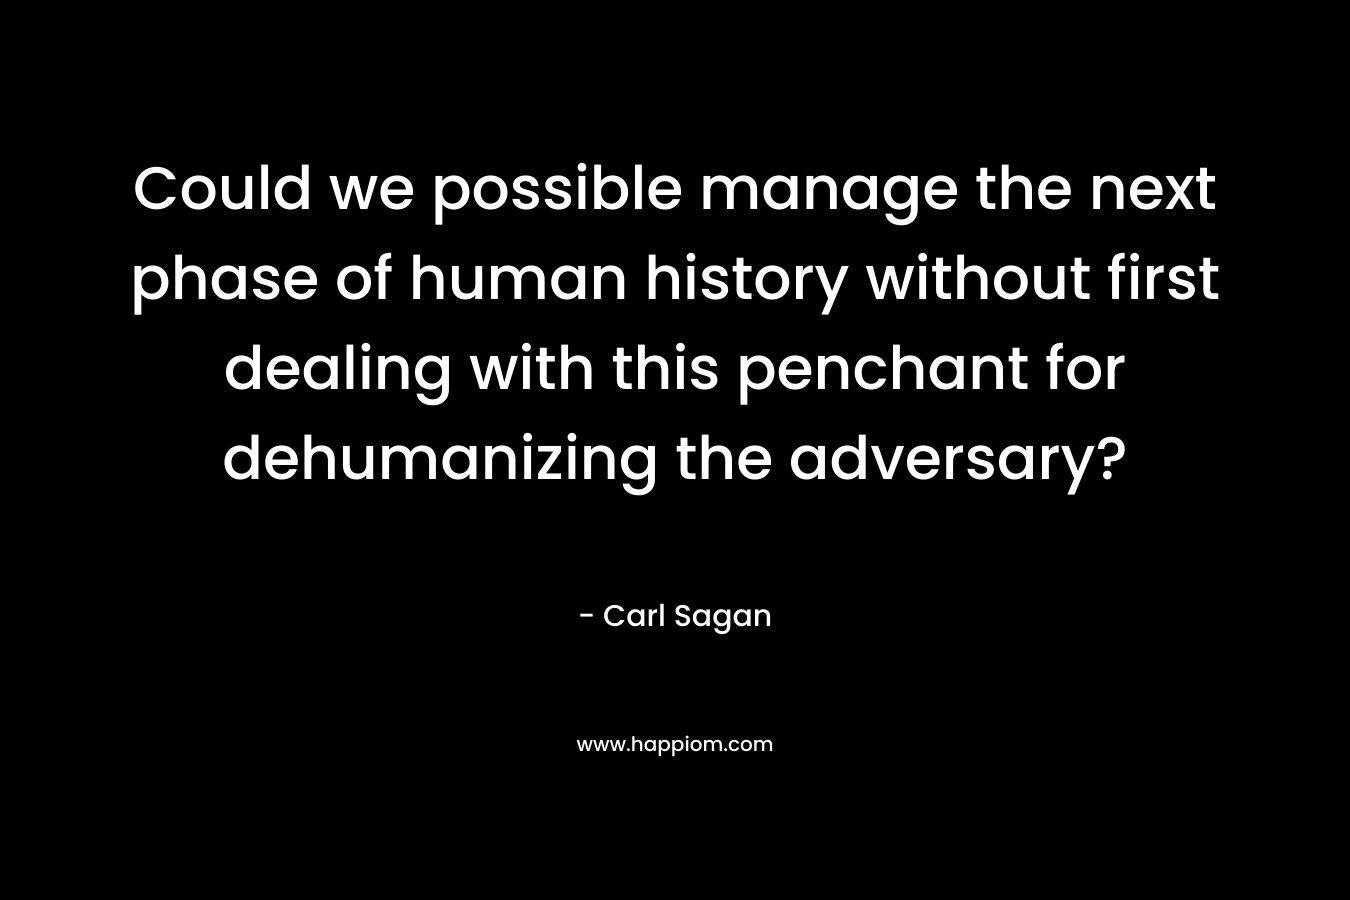 Could we possible manage the next phase of human history without first dealing with this penchant for dehumanizing the adversary? – Carl Sagan